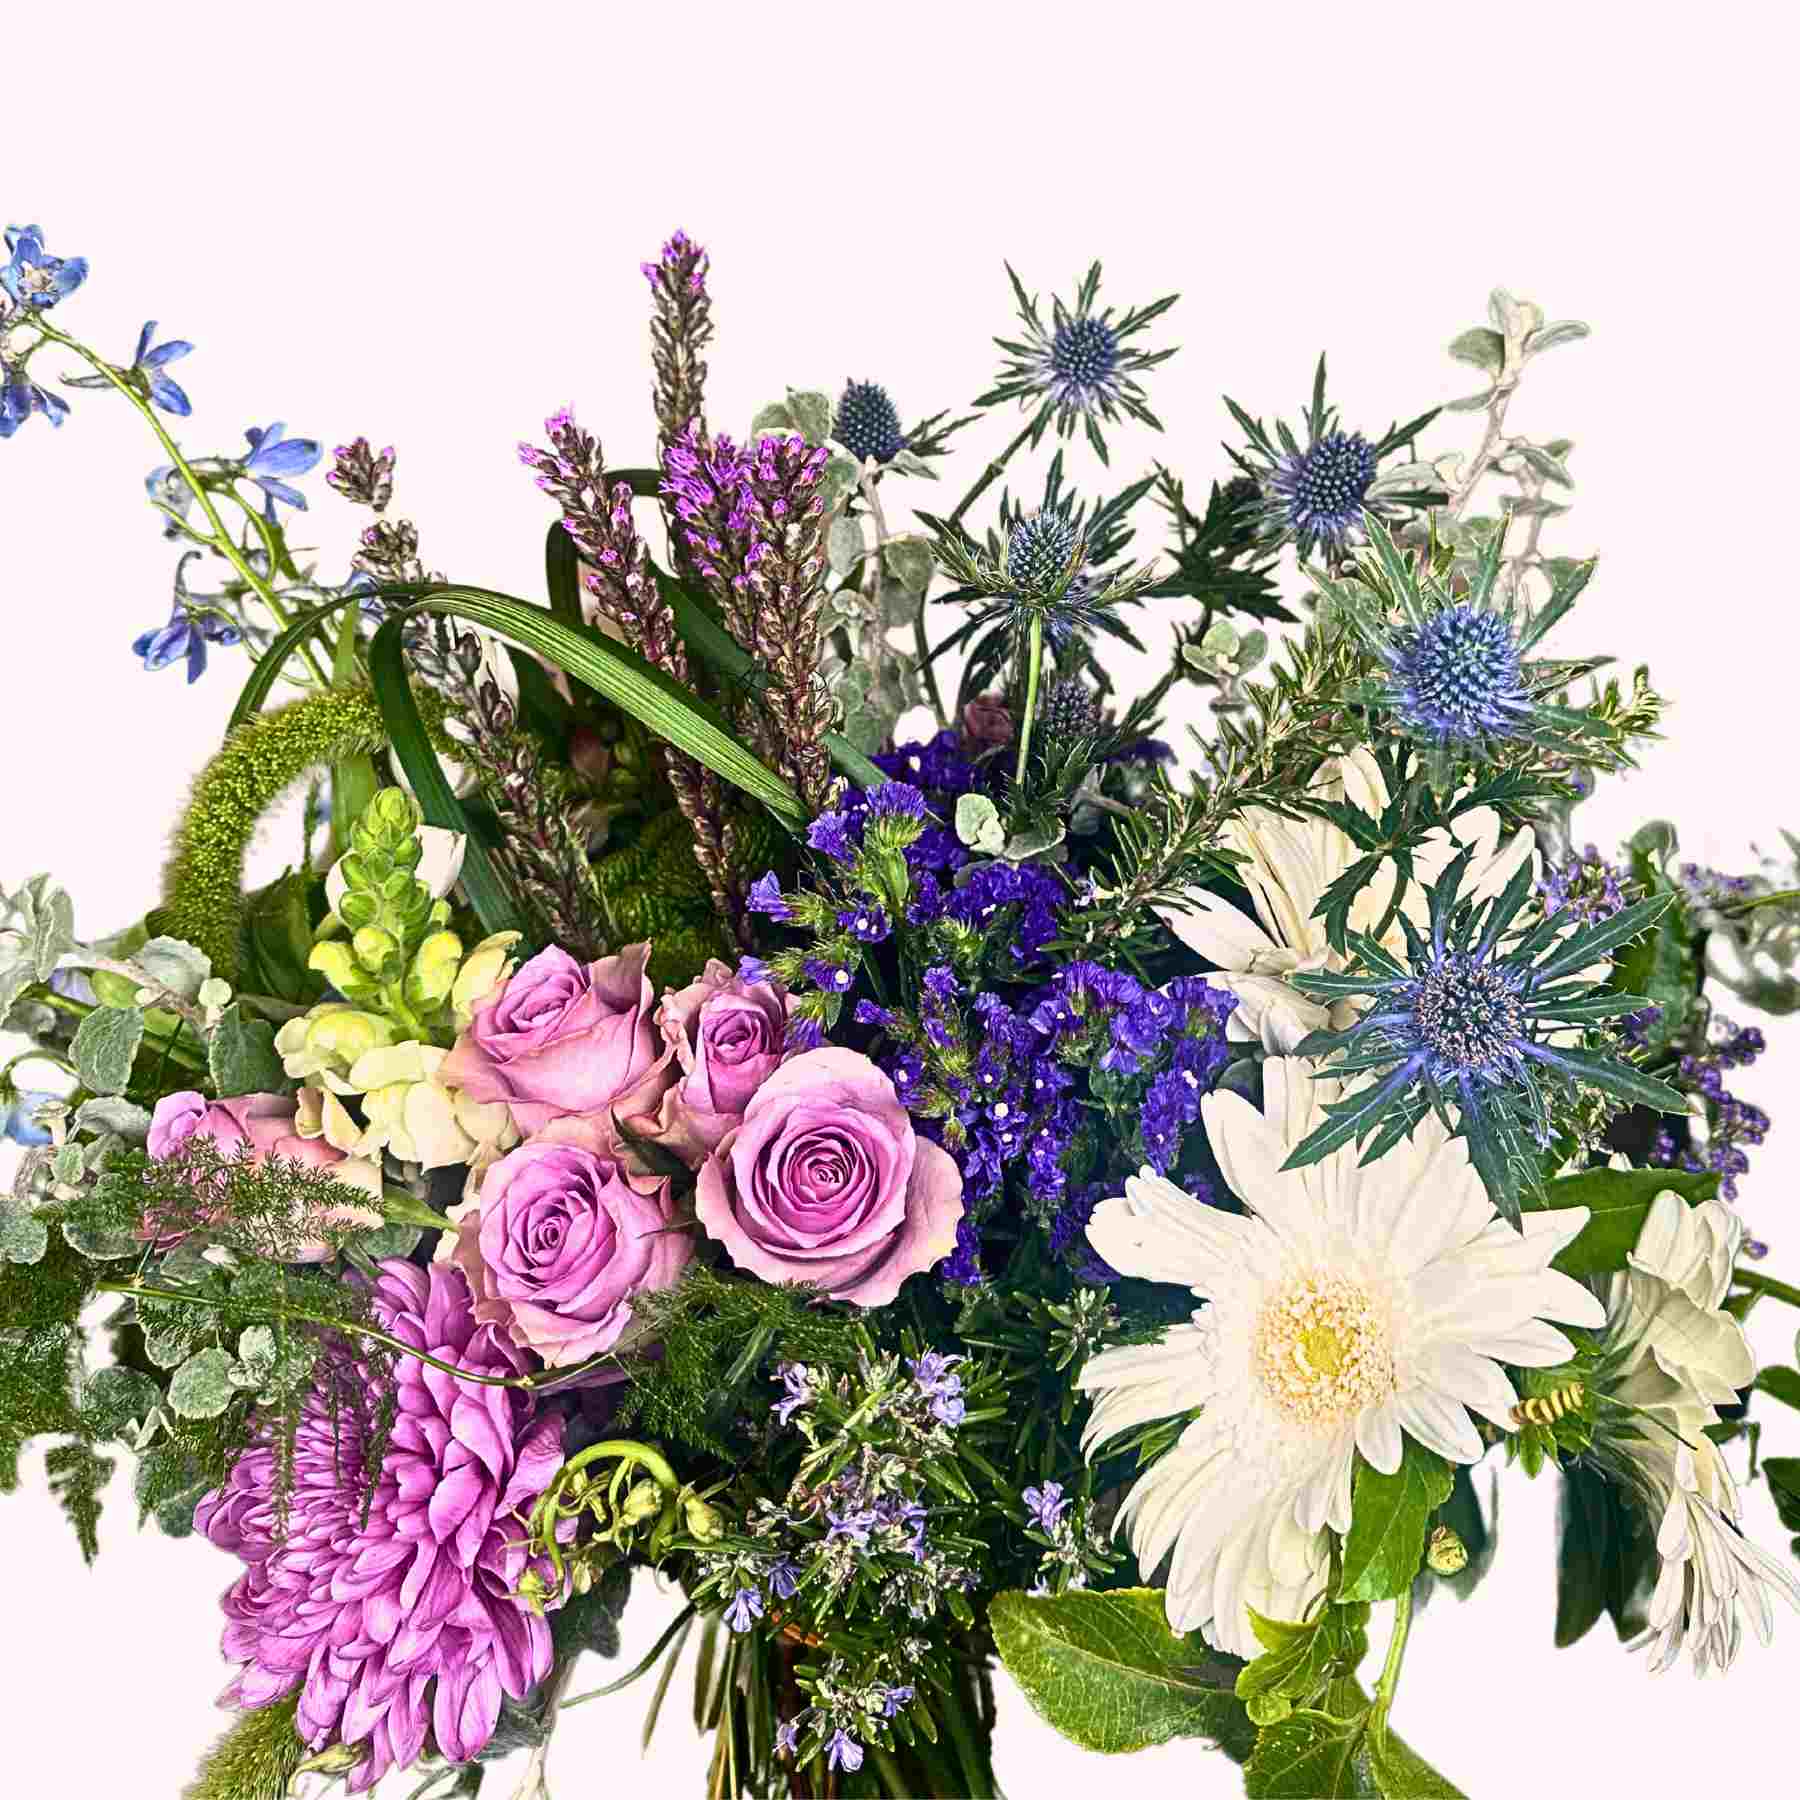 Joy's Flower Bouquet, a stunning mix of purple roses, white gerberas, and blue thistles, from Fabulous Flowers and Gifts.